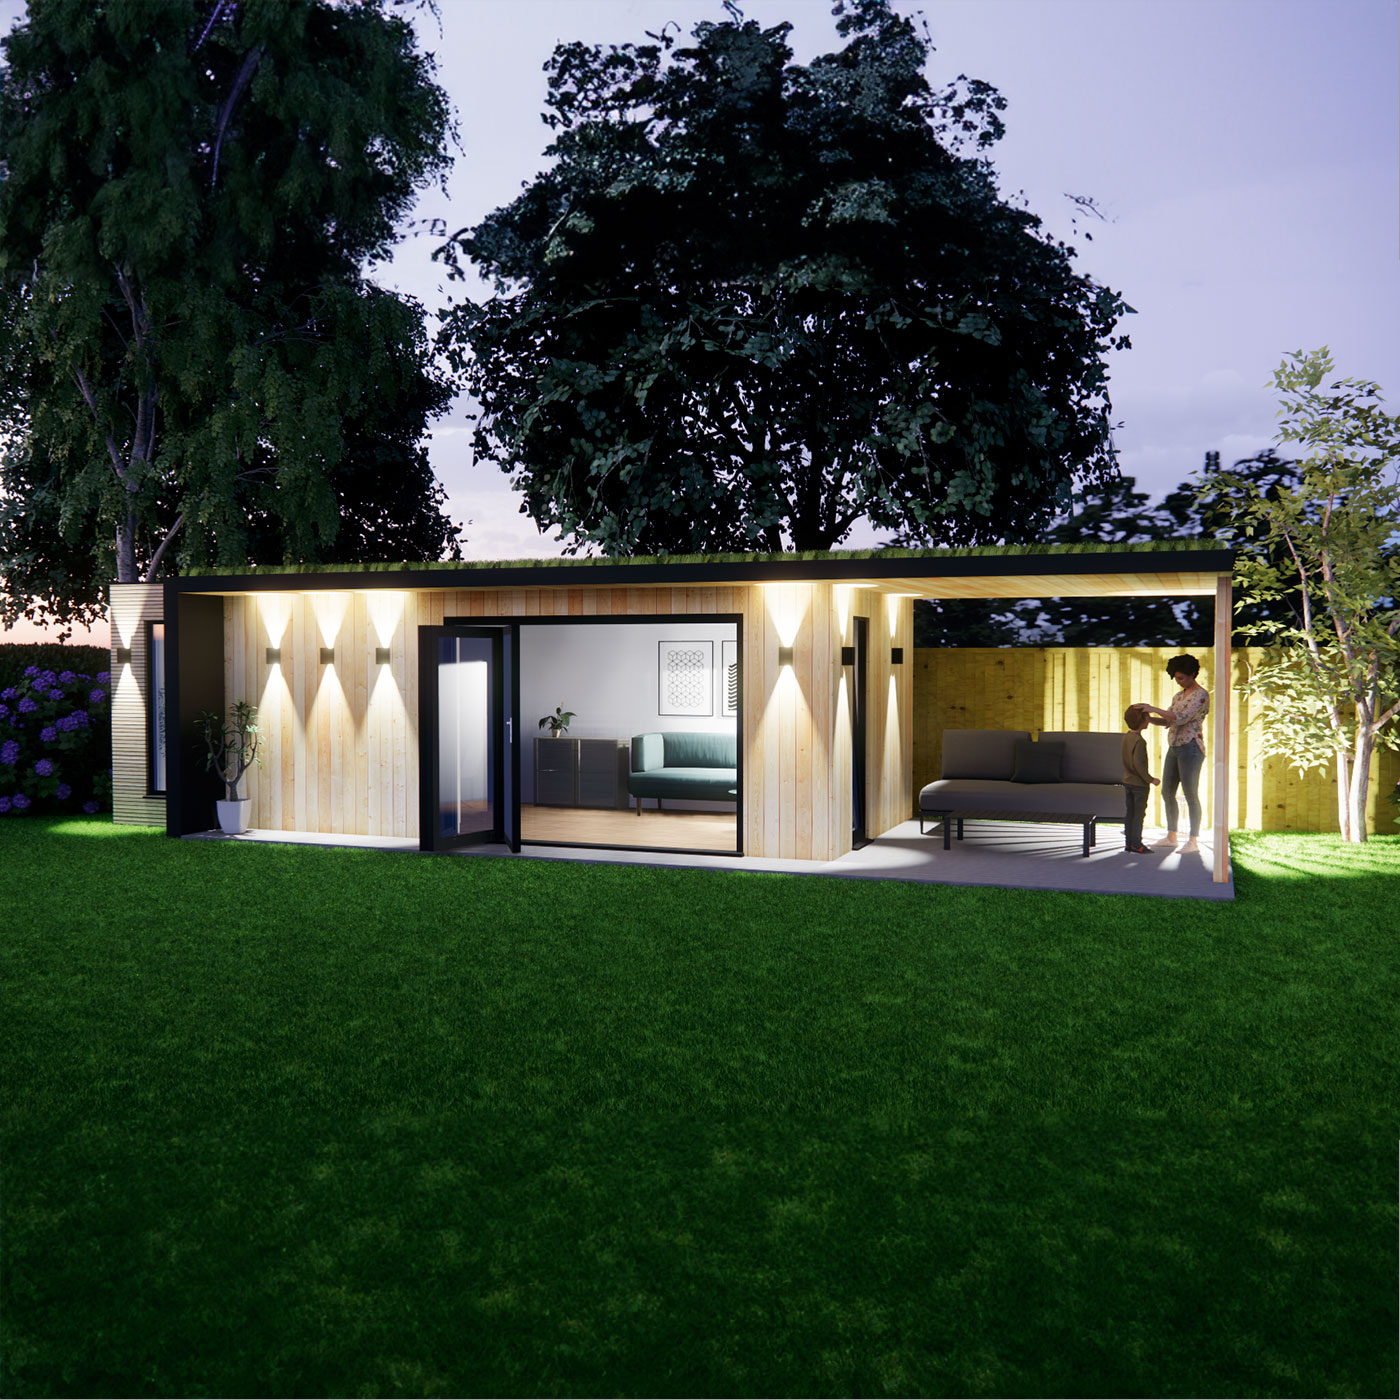 3D visualisation of garden office with roof overhang 3.0m by 7.4m